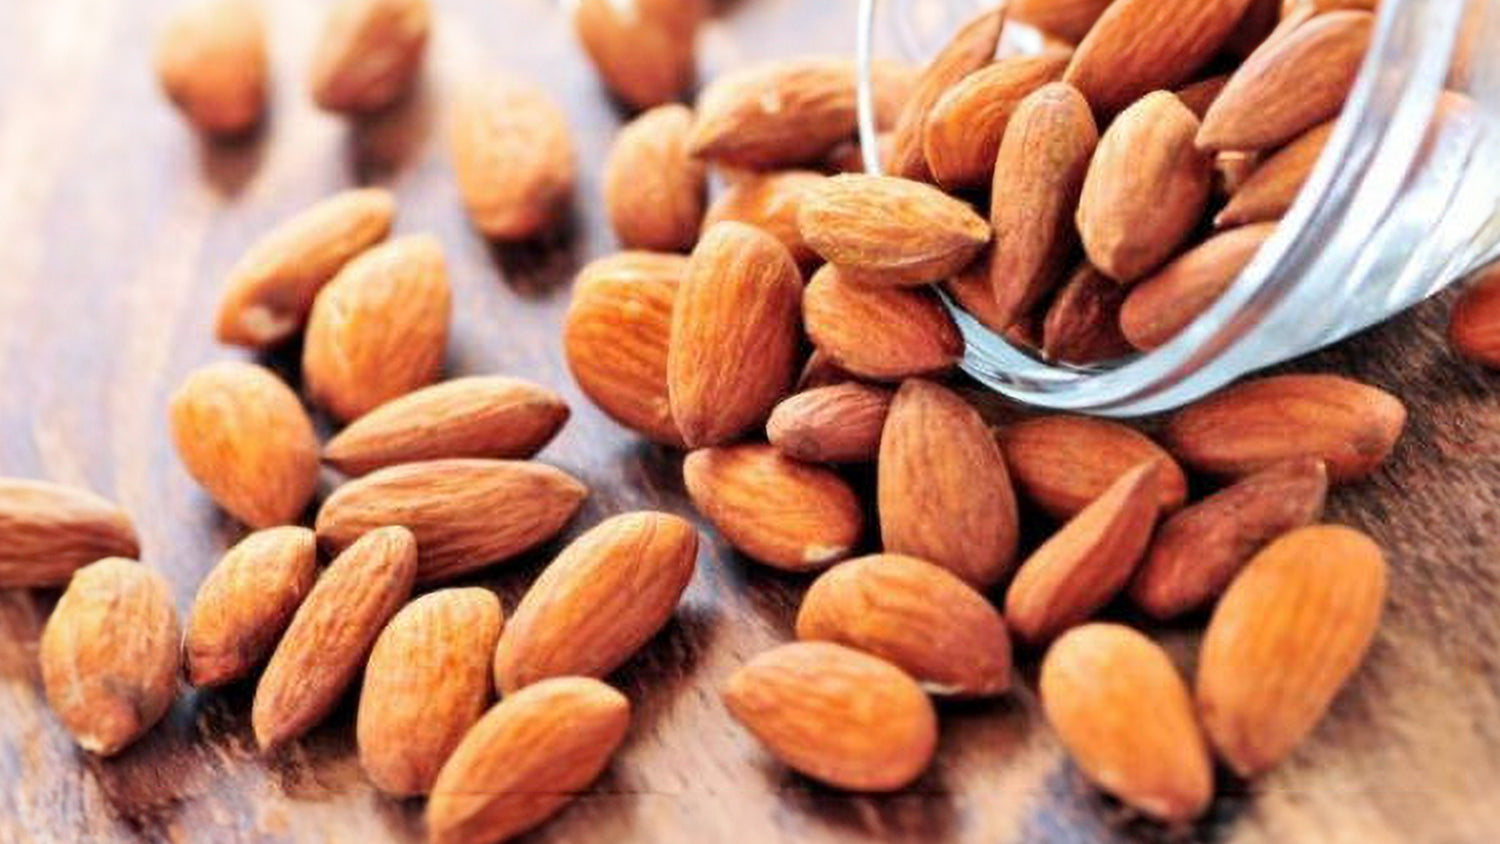 24 Almonds a Day Keeps the Doctor Away